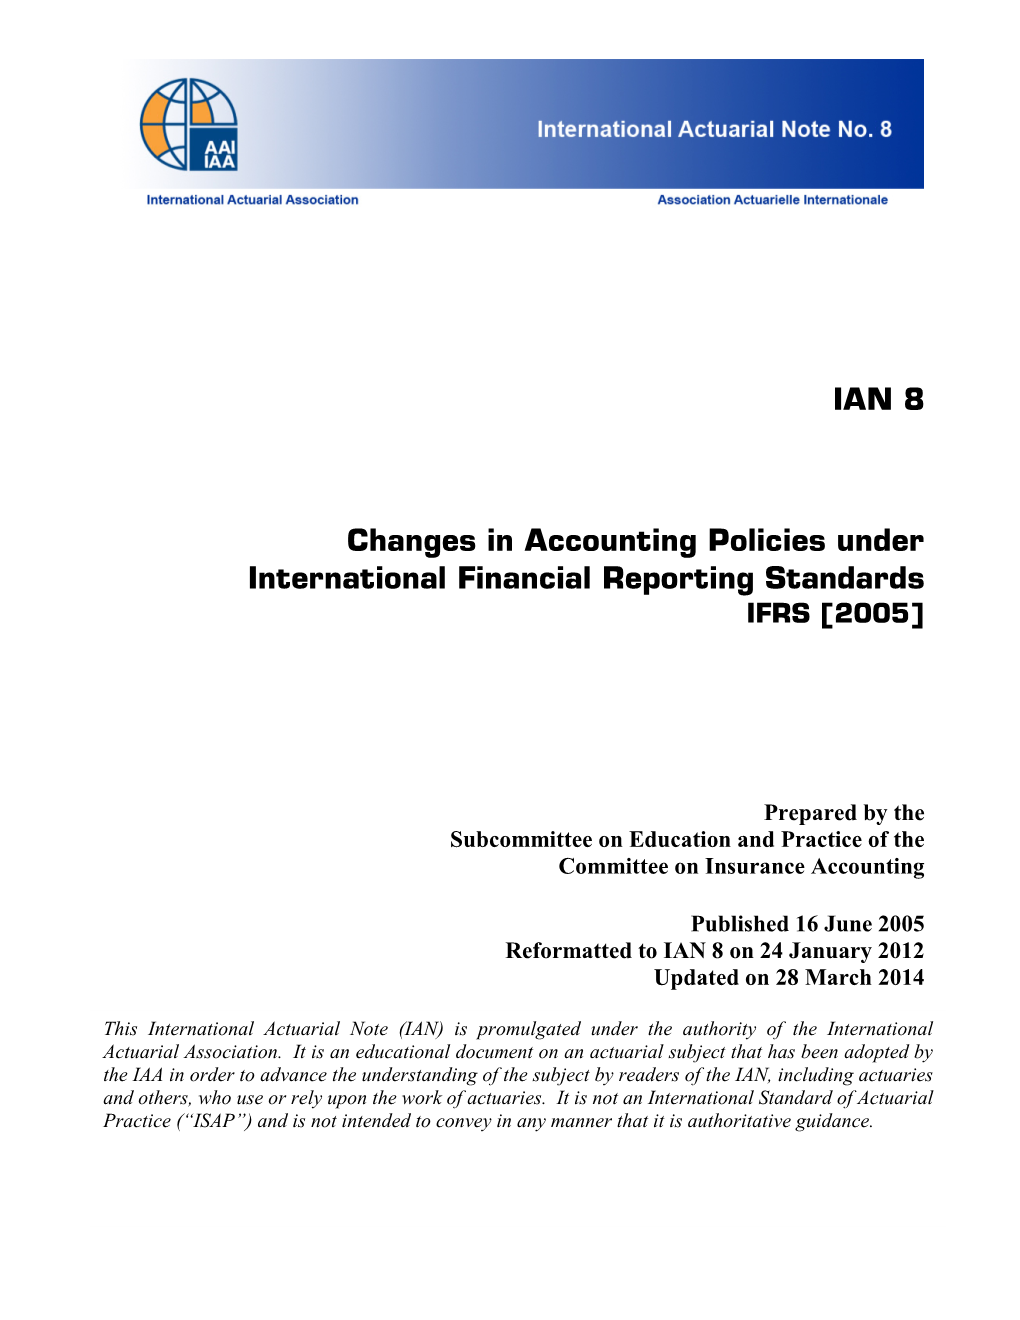 IAA Standard Changes in Accounting Policy